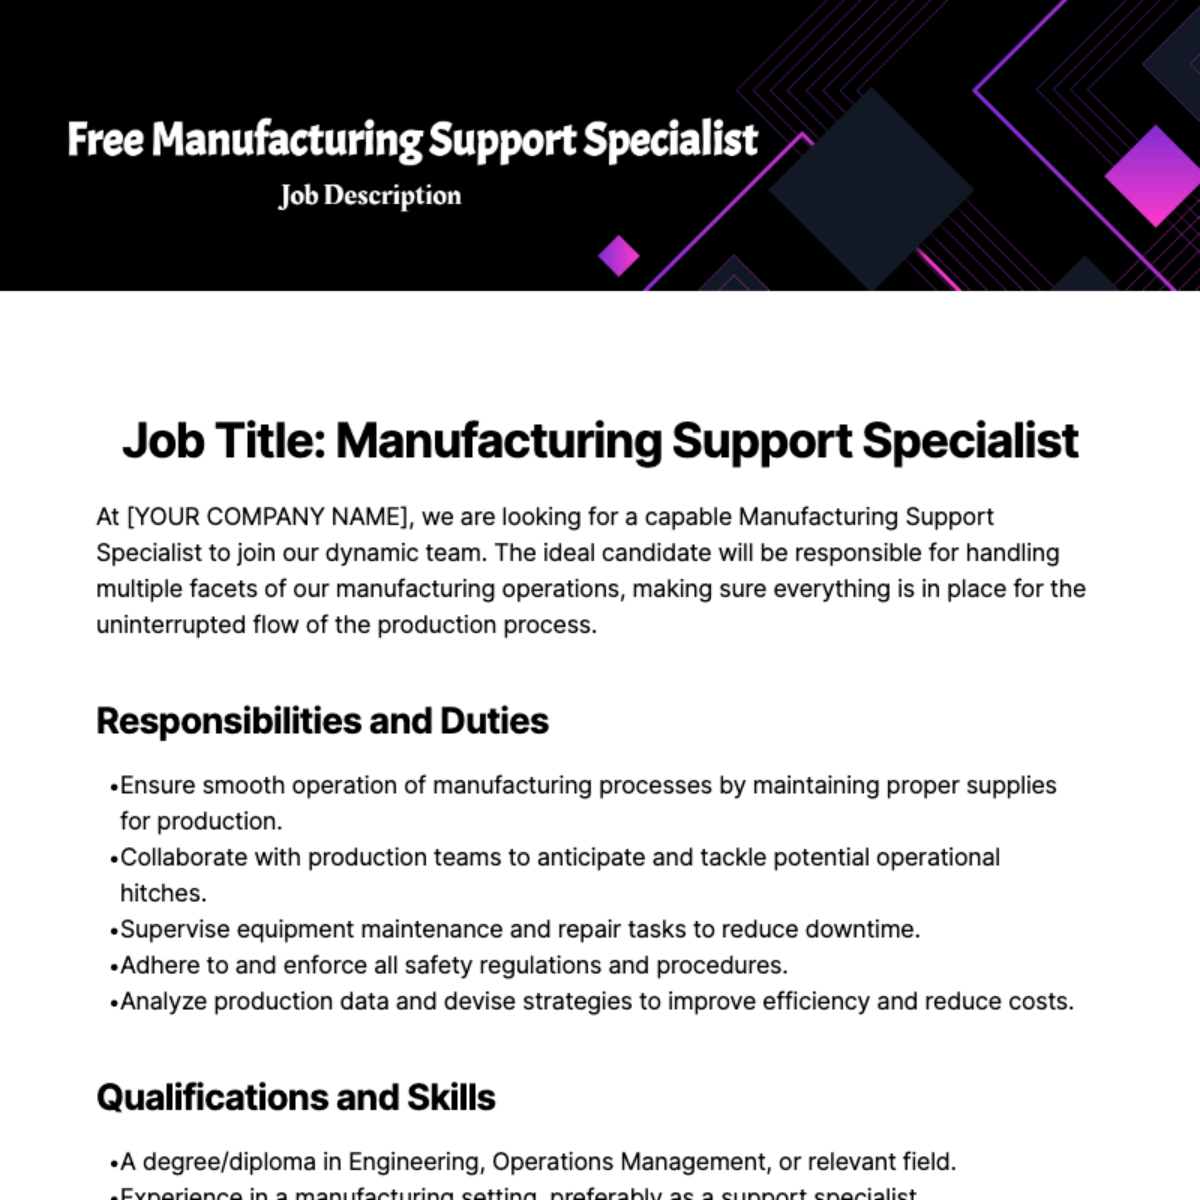 Free Manufacturing Support Specialist Job Description Template